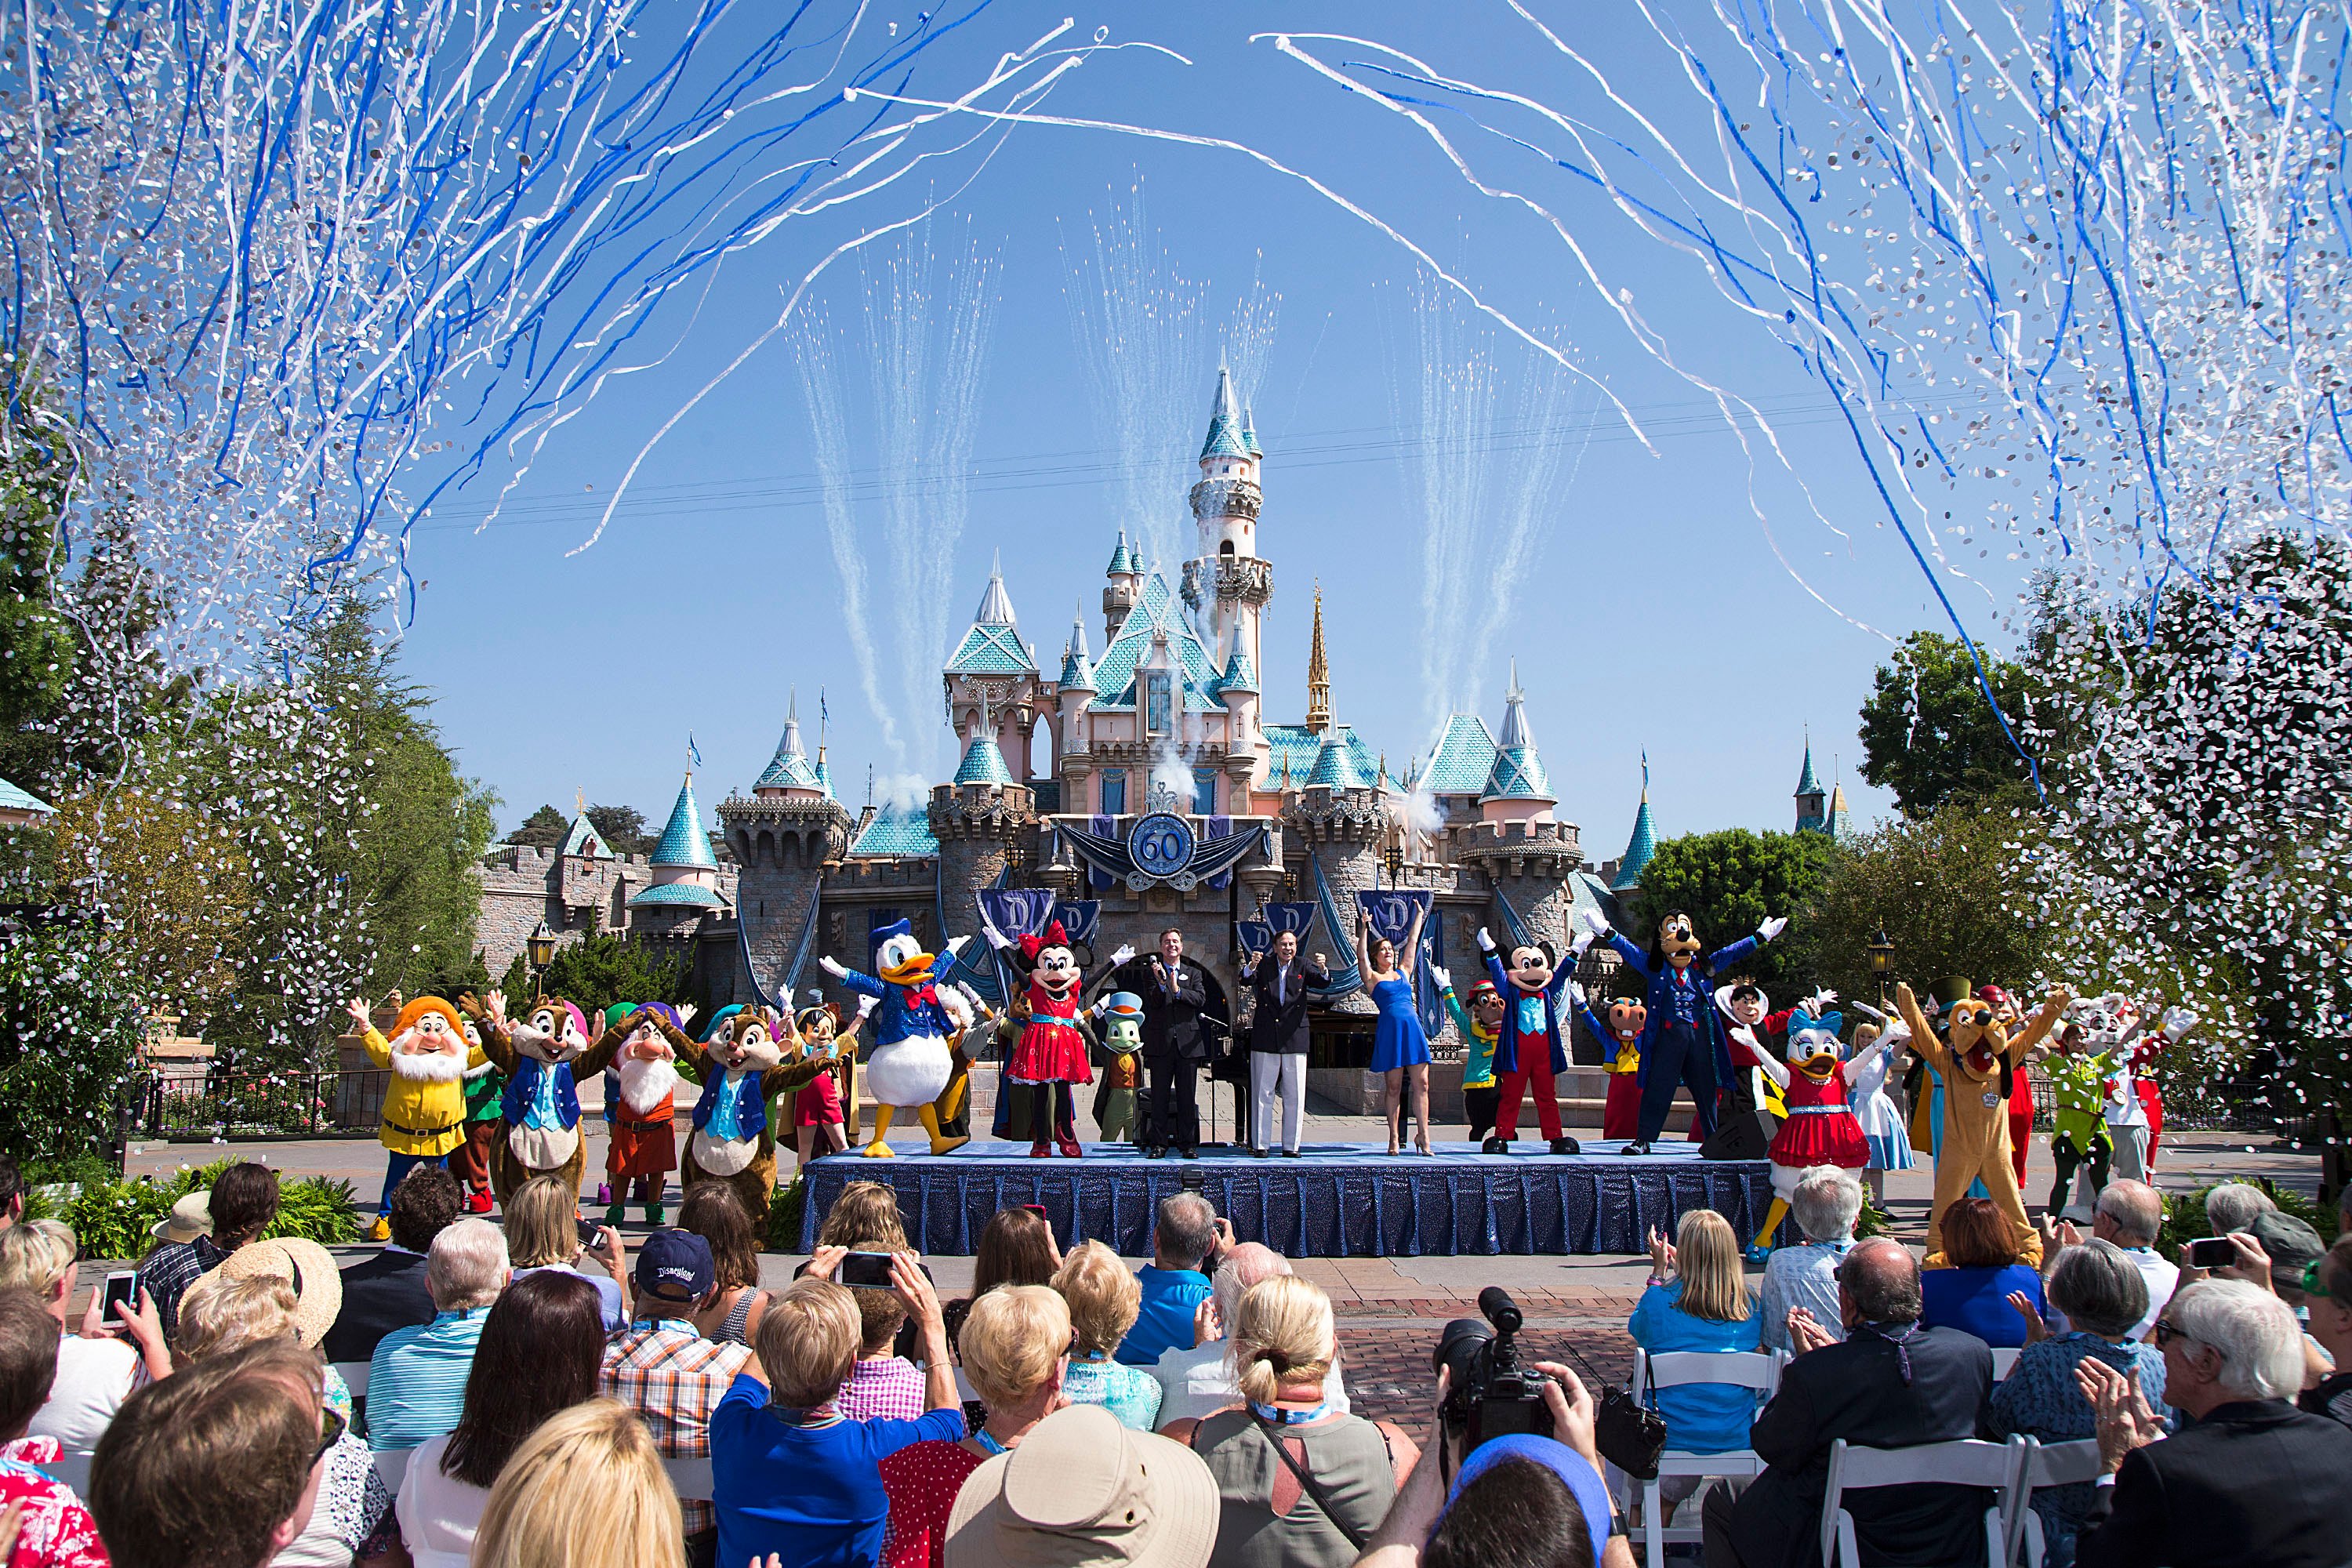 Disneyland, seen here celebrating their 60th anniversary, is hiking up ticket prices ahead of the opening of Galaxy's Edge.